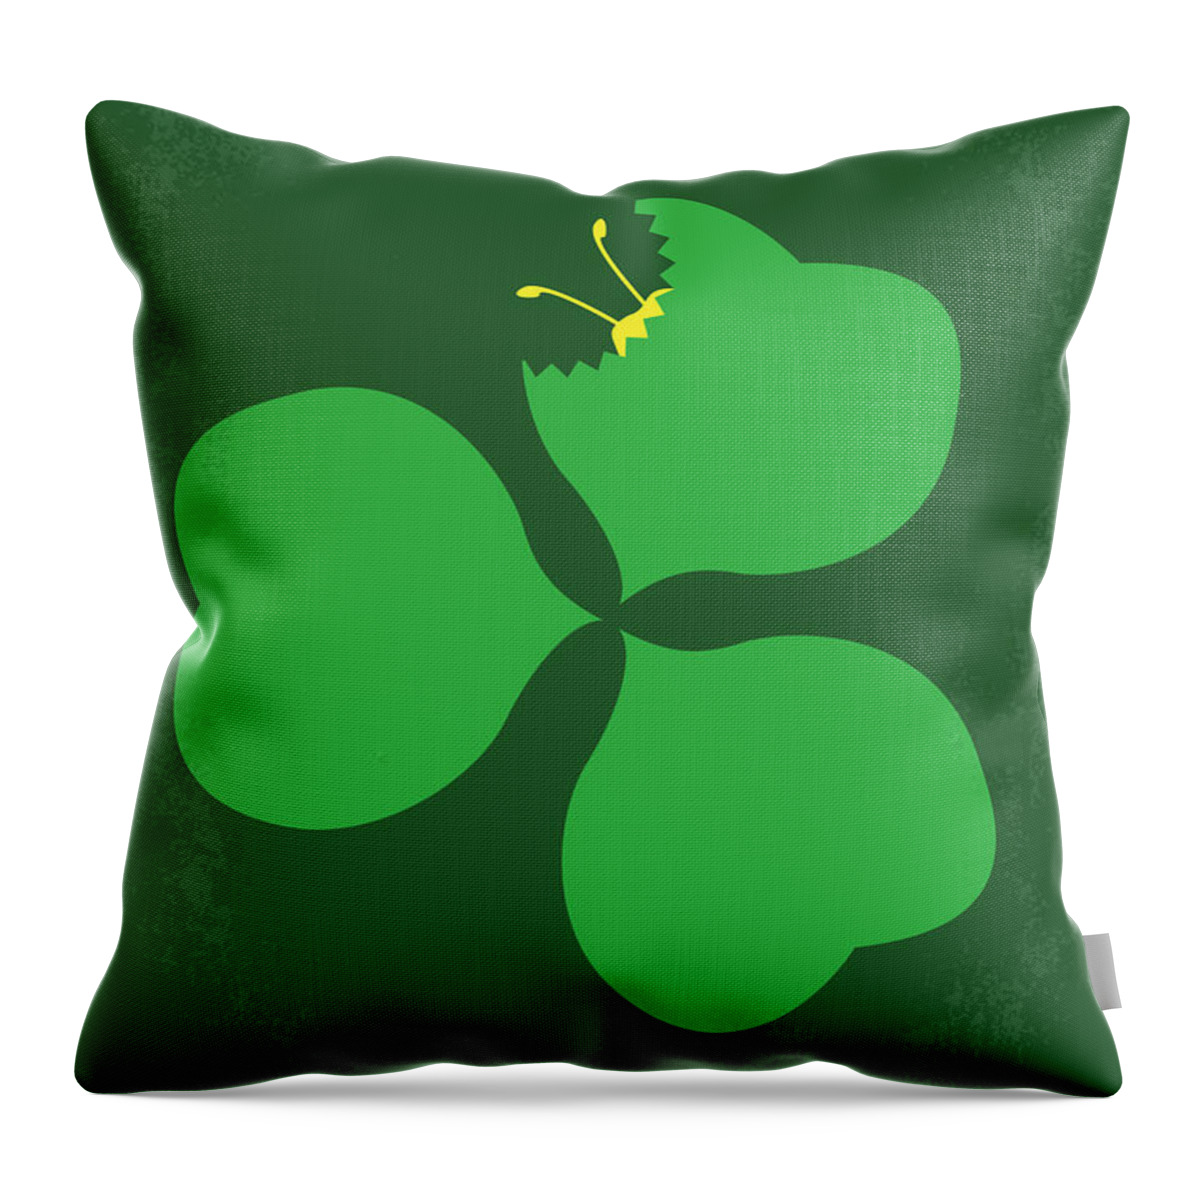 A Bugs Life Throw Pillow featuring the digital art No401 My A Bugs Life minimal movie poster by Chungkong Art